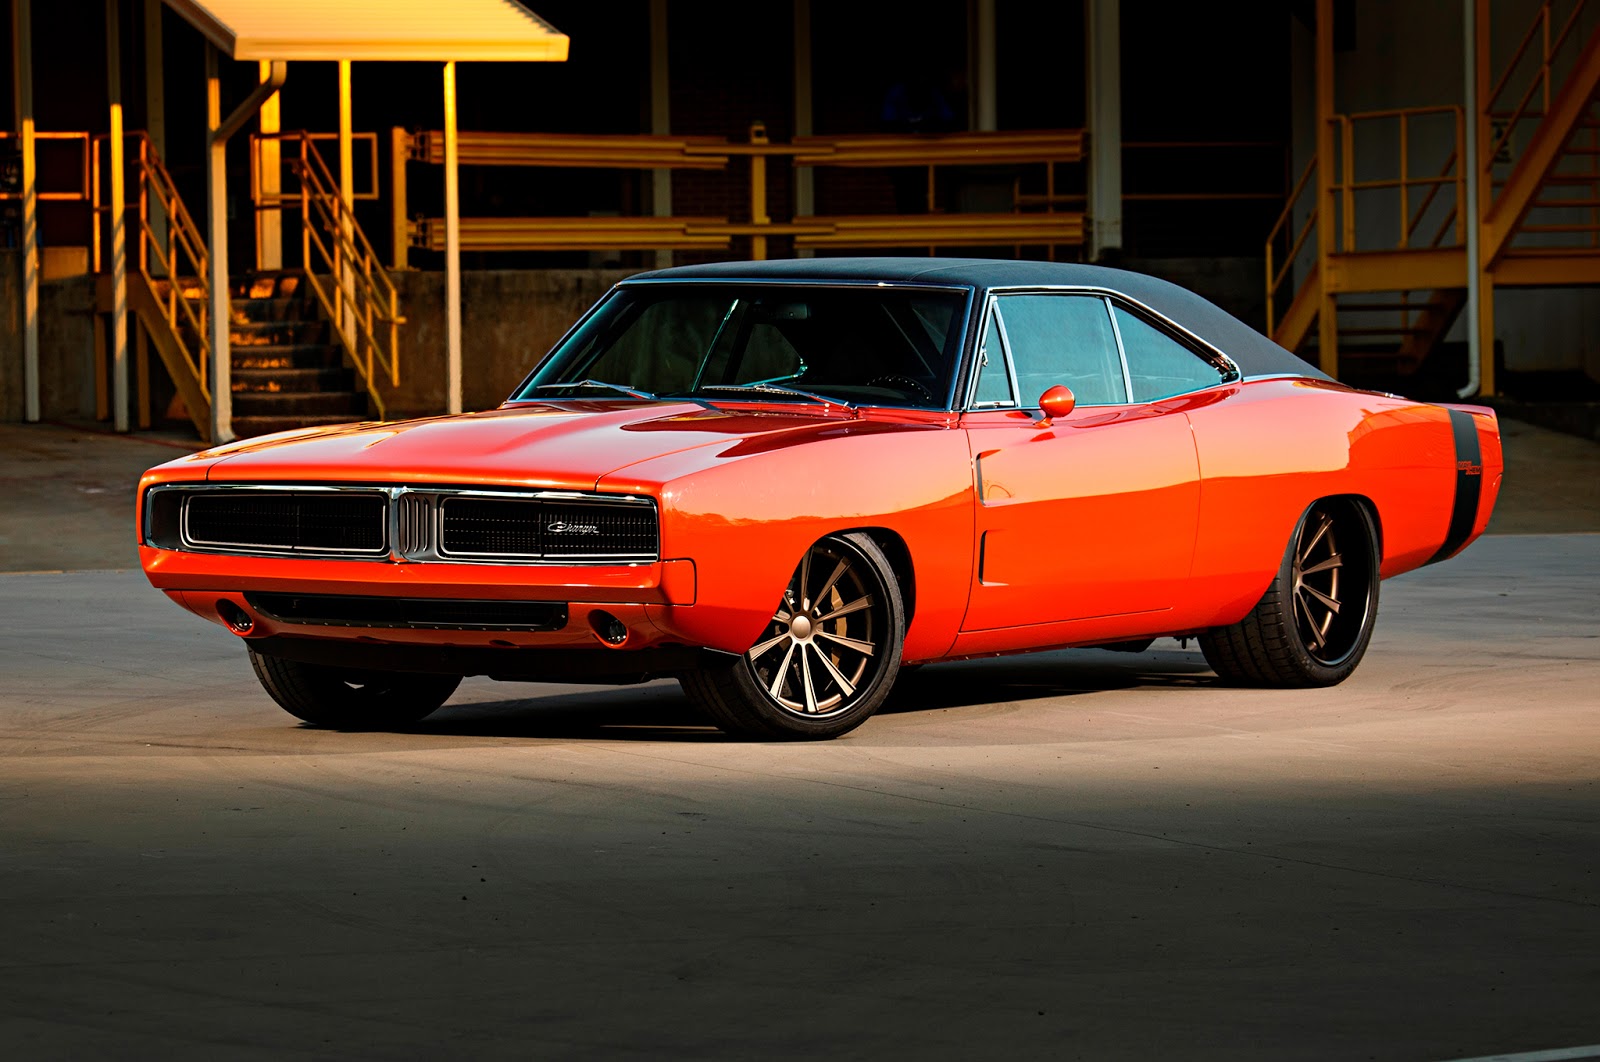 MUSCLE CAR COLLECTION : 69 Dodge Charger, American Muscle Car Legend